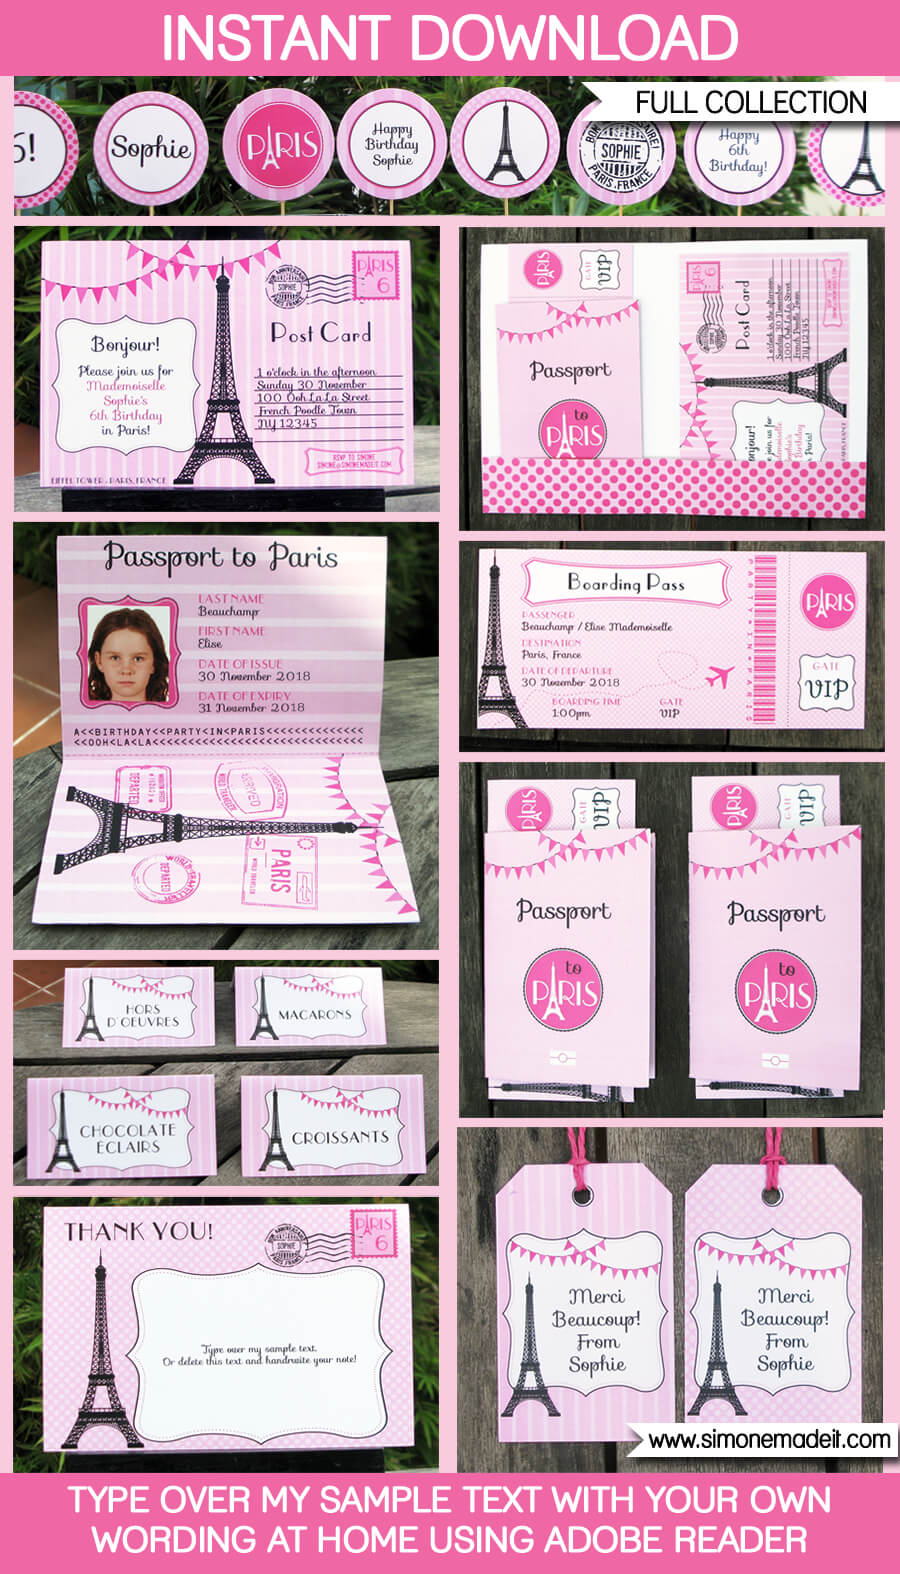 Paris Party Printables Invitations and Decorations | Full Printable Package | Editable Templates | INSTANT DOWNLOAD $12.50 via simonemadeit.com